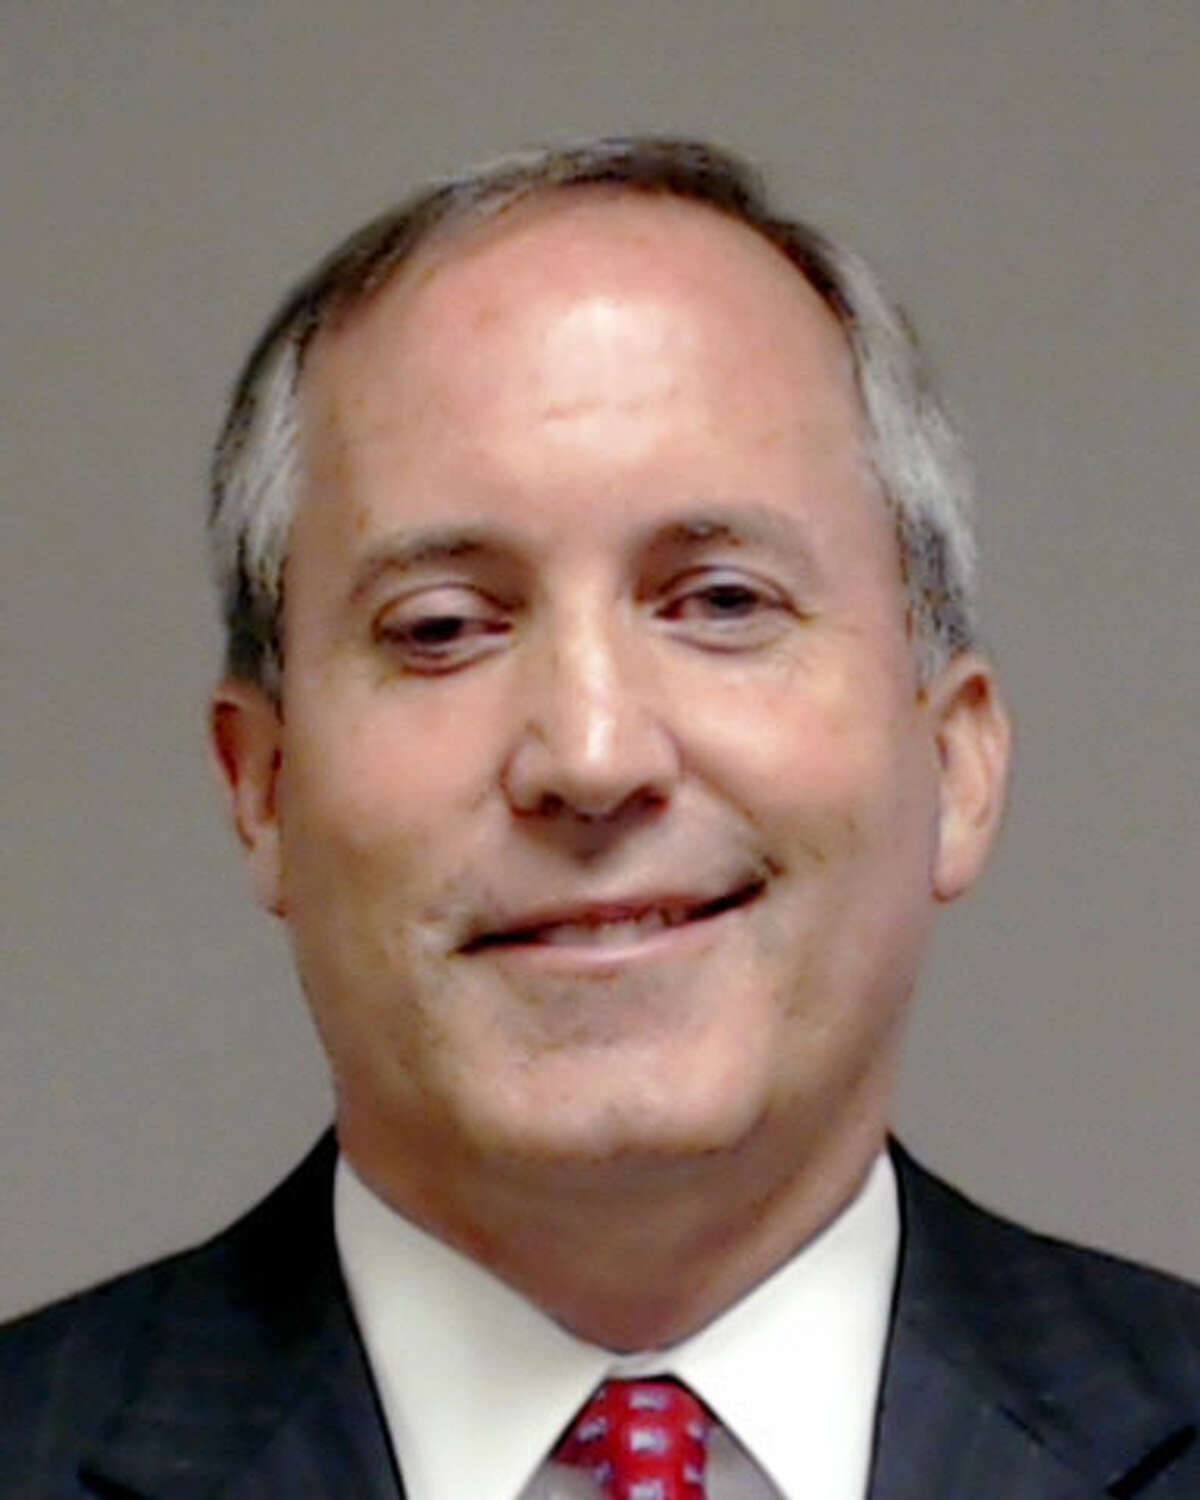 Texas Attorney General Ken Paxton faces two counts of first-degree securities fraud and a charge of failing to register with state securities regulators.